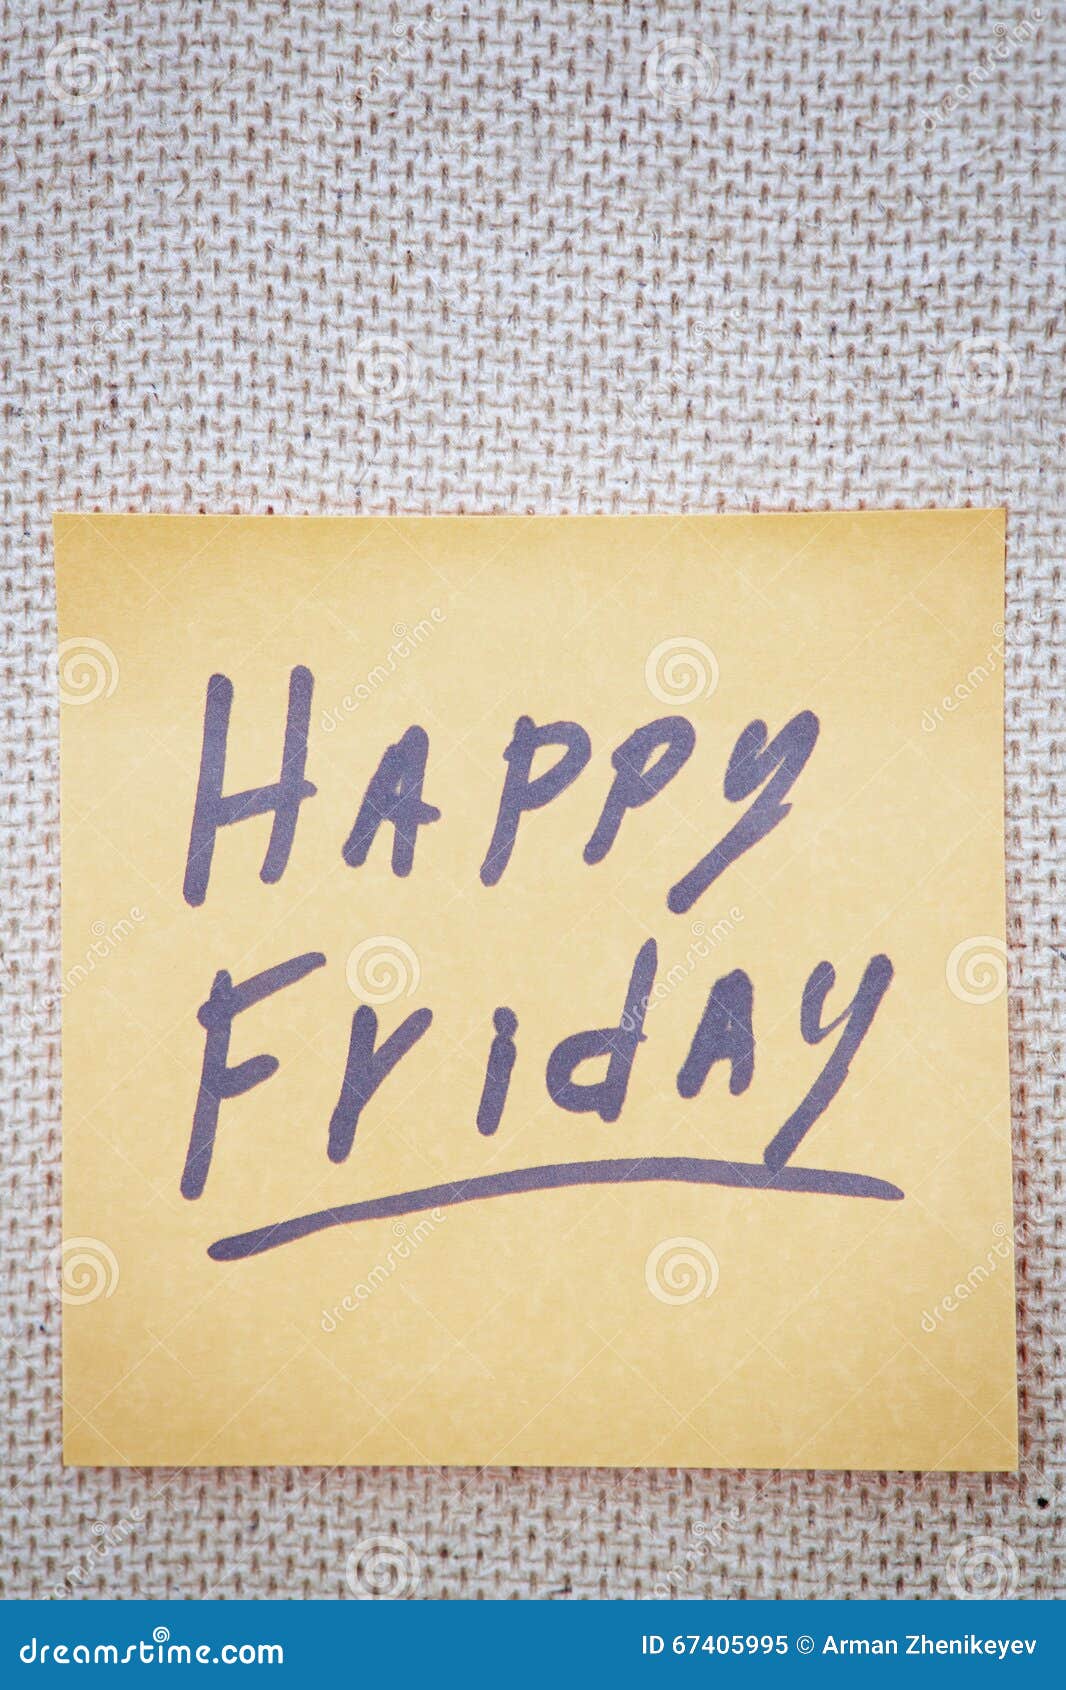 Happy Friday stock image. Image of minute, bulletin, message - 67405995